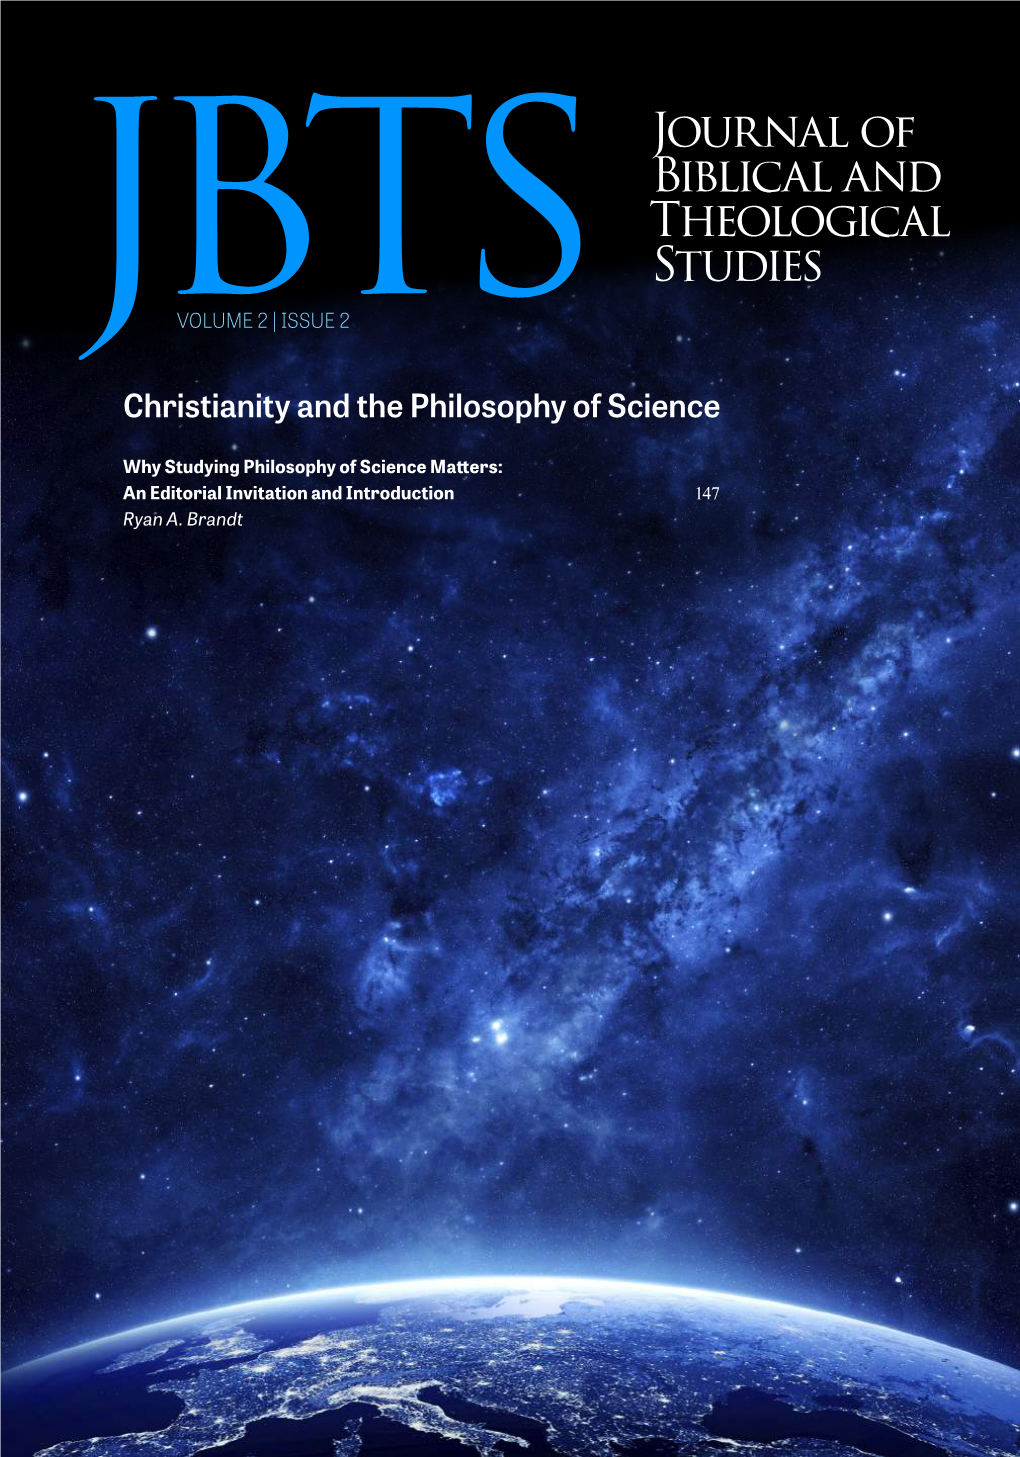 Why Studying Philosophy of Science Matters: an Editorial Invitation and Introduction 147 Ryan A